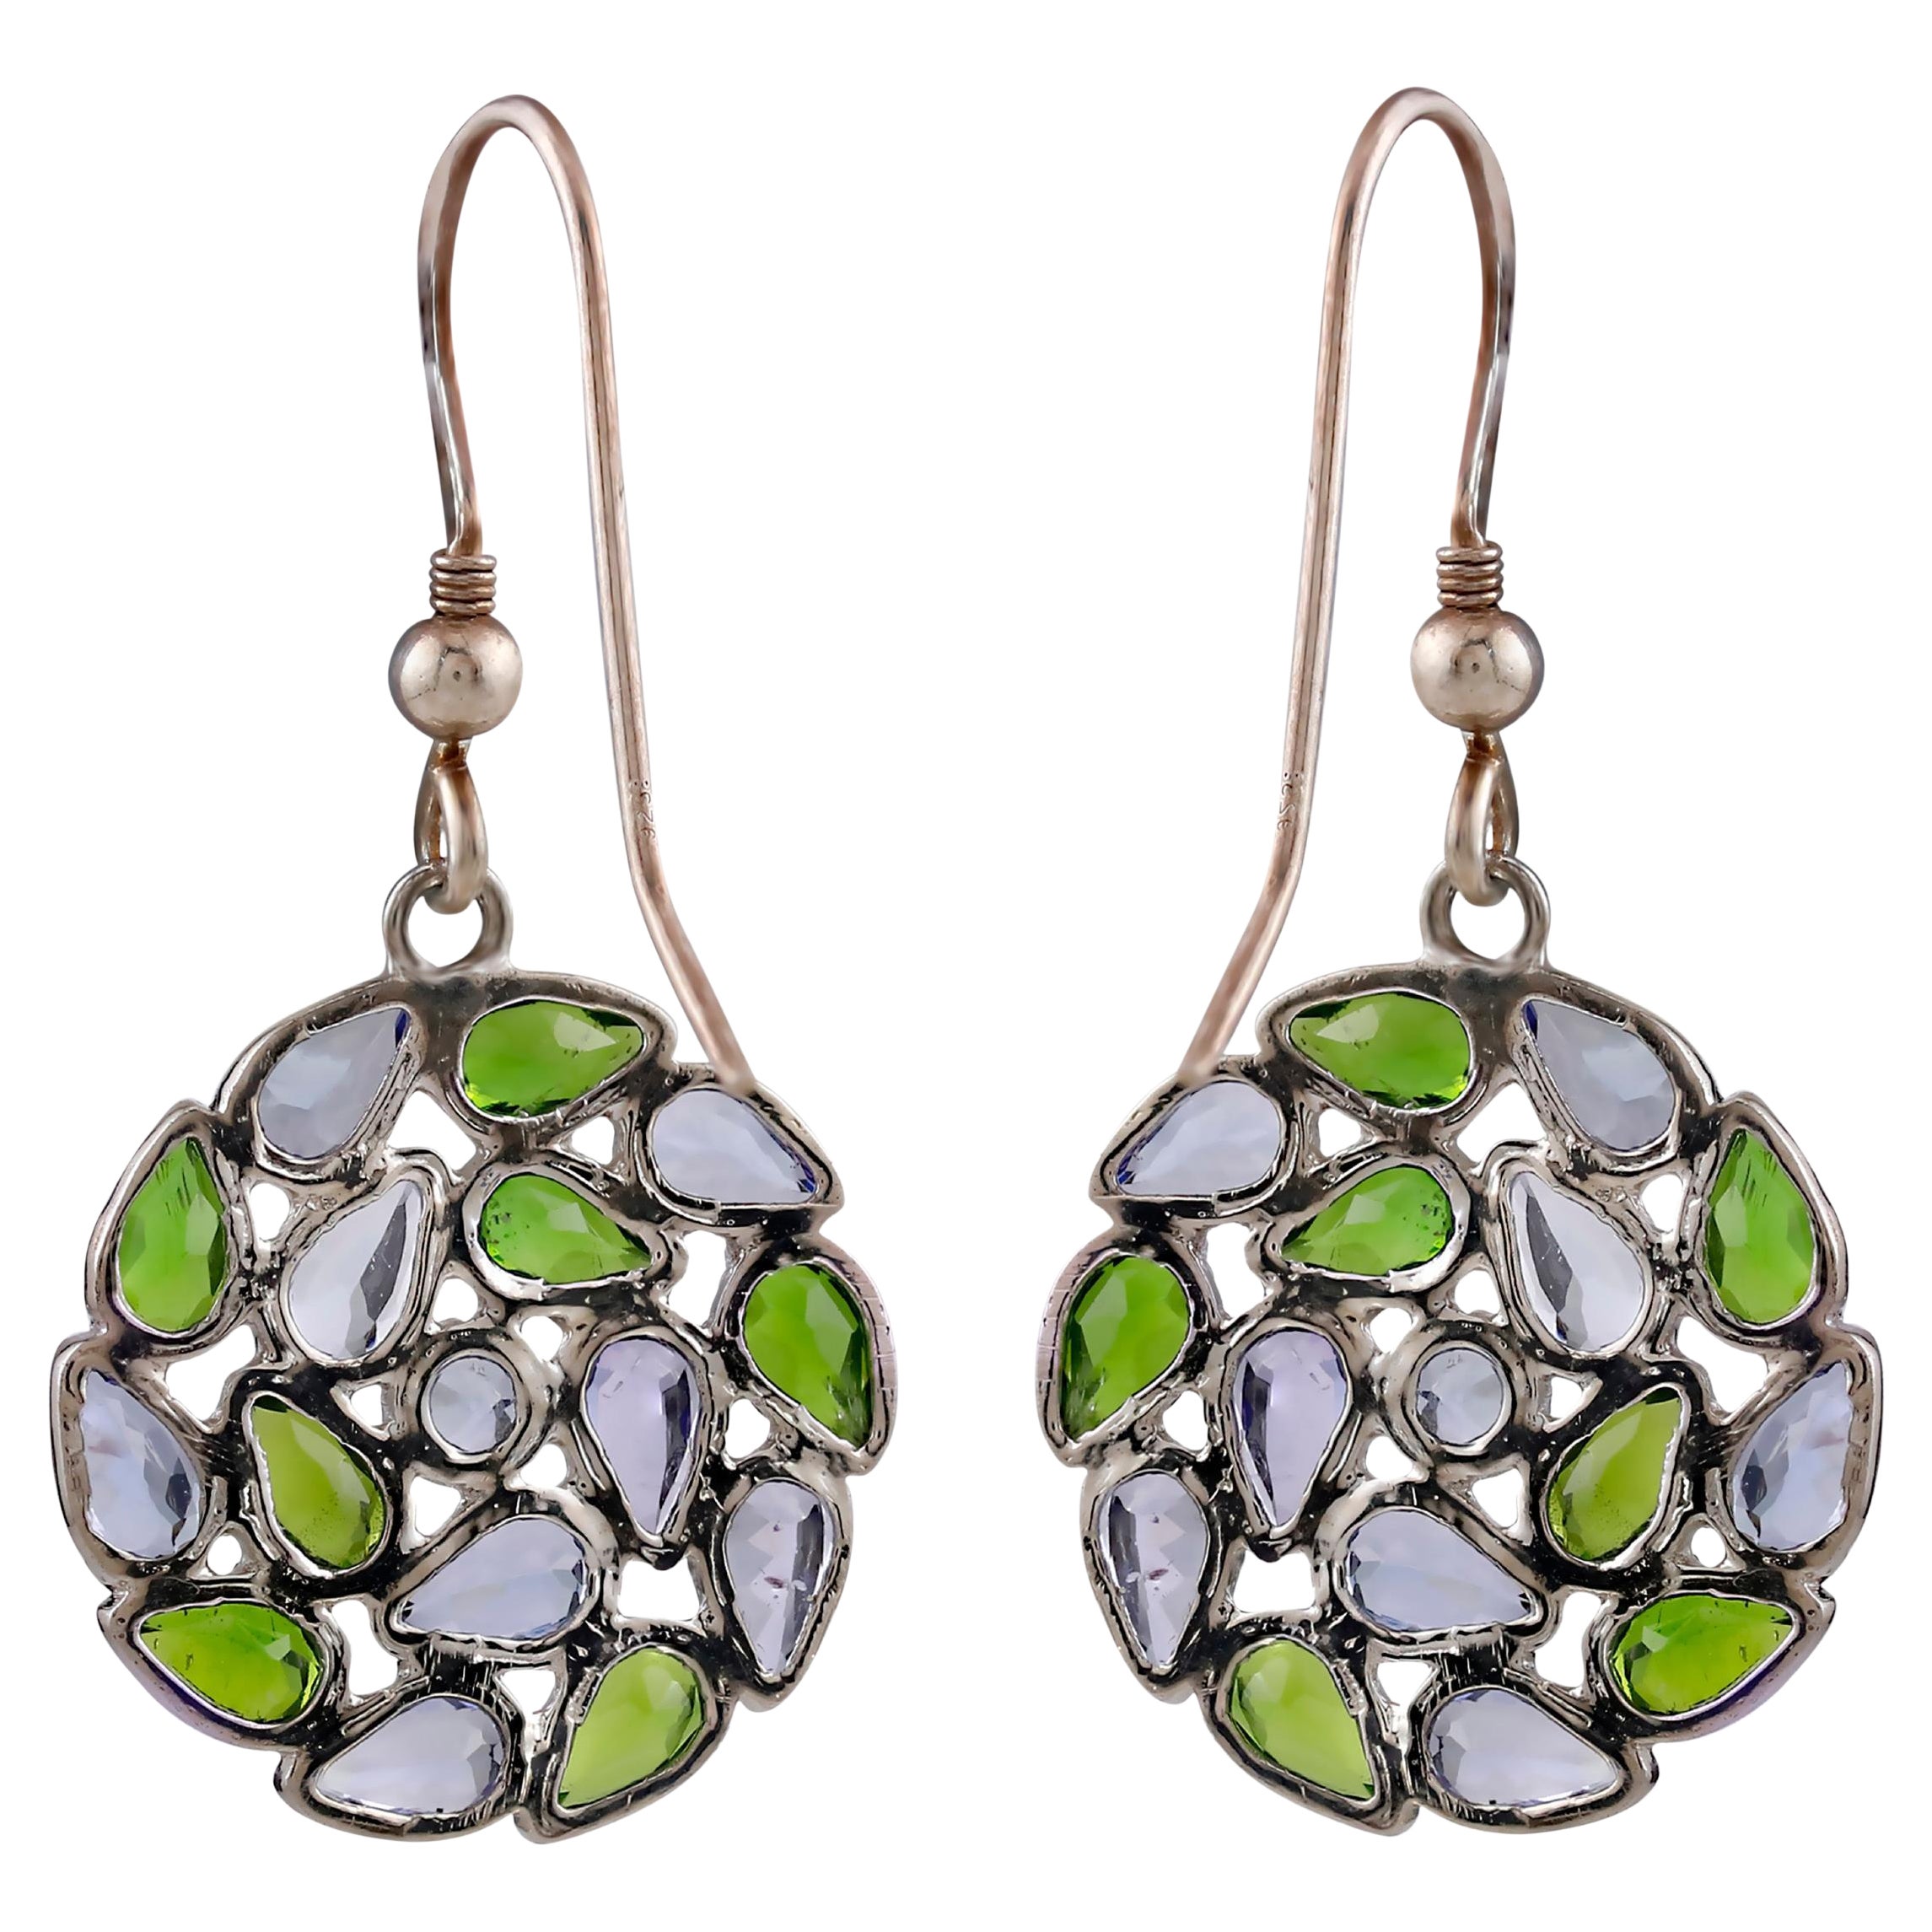 Gemistry Victorian 6.5cttw Rutile & Chrome Diopside Earring in Sterling Silver For Sale